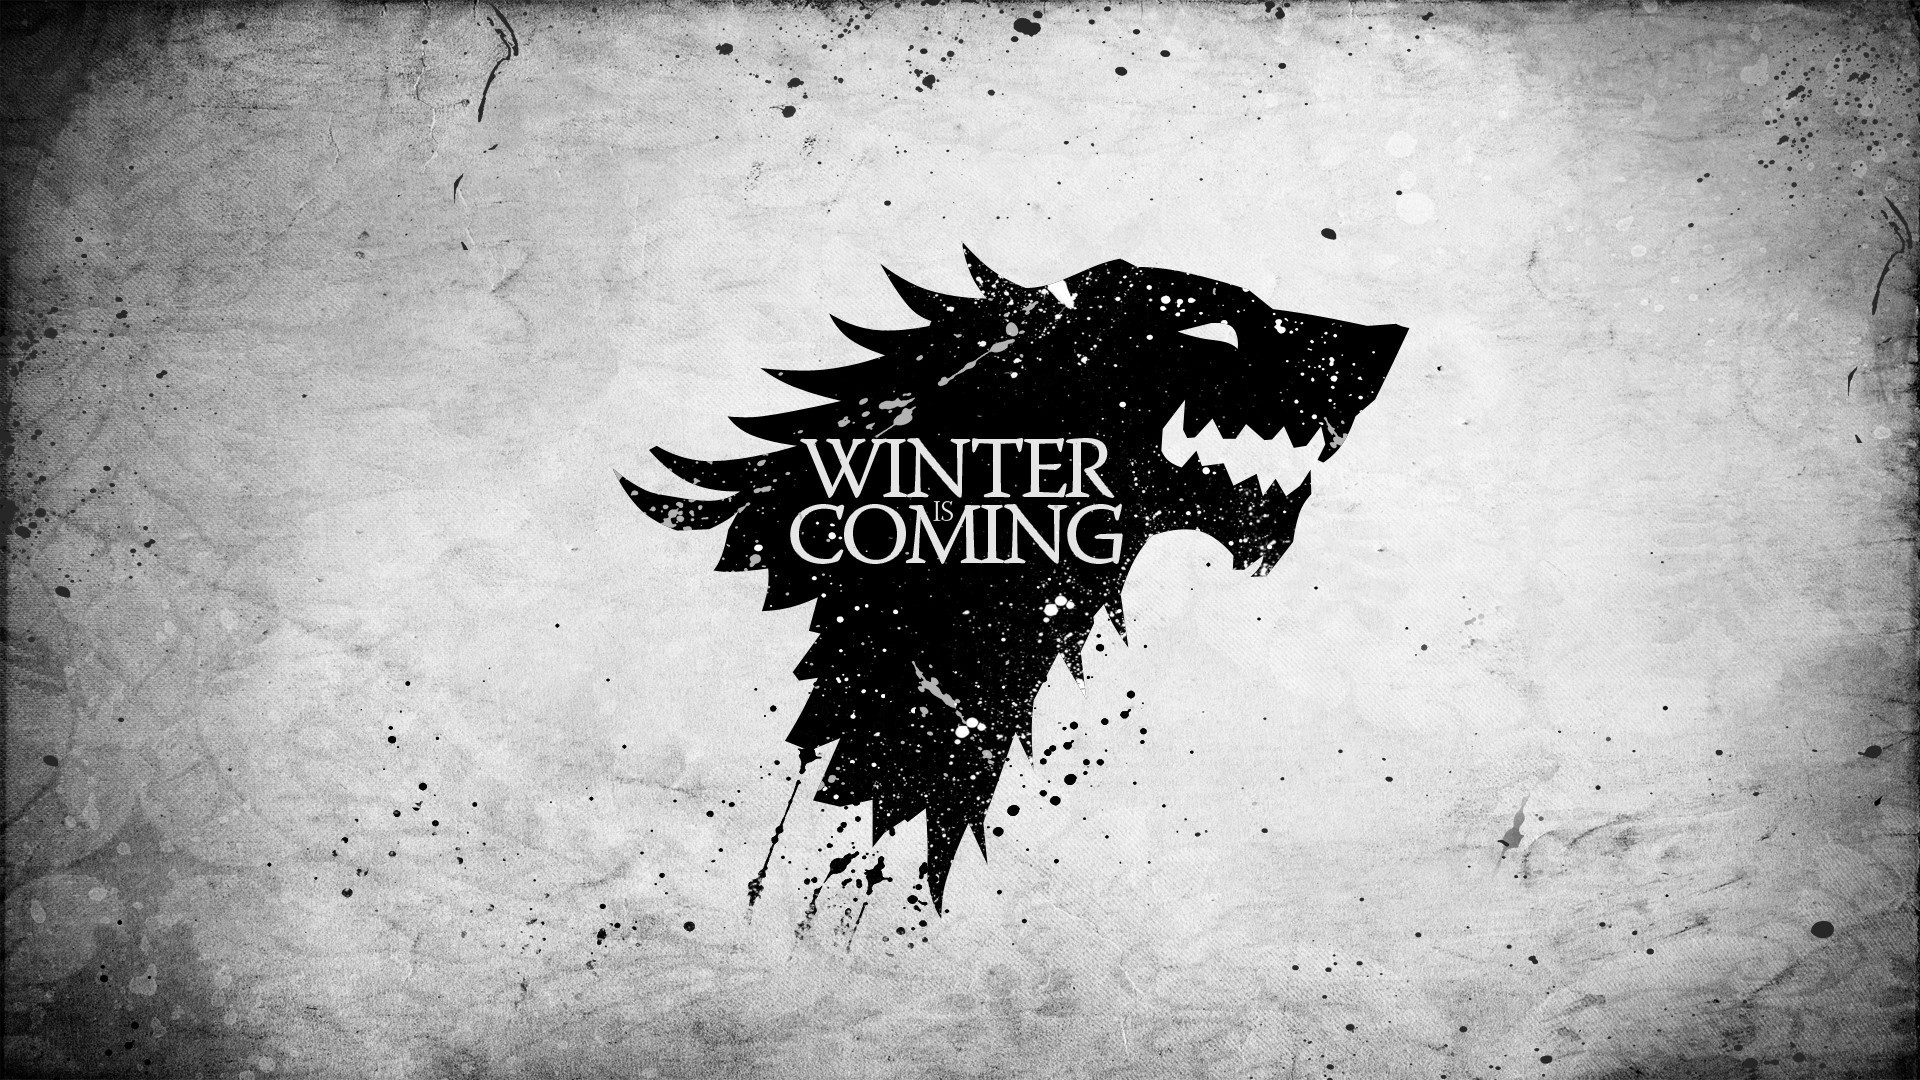 A Song Of Ice And Fire, Game Of Thrones, House Stark, Sigils, Winter Is Coming Wallpaper